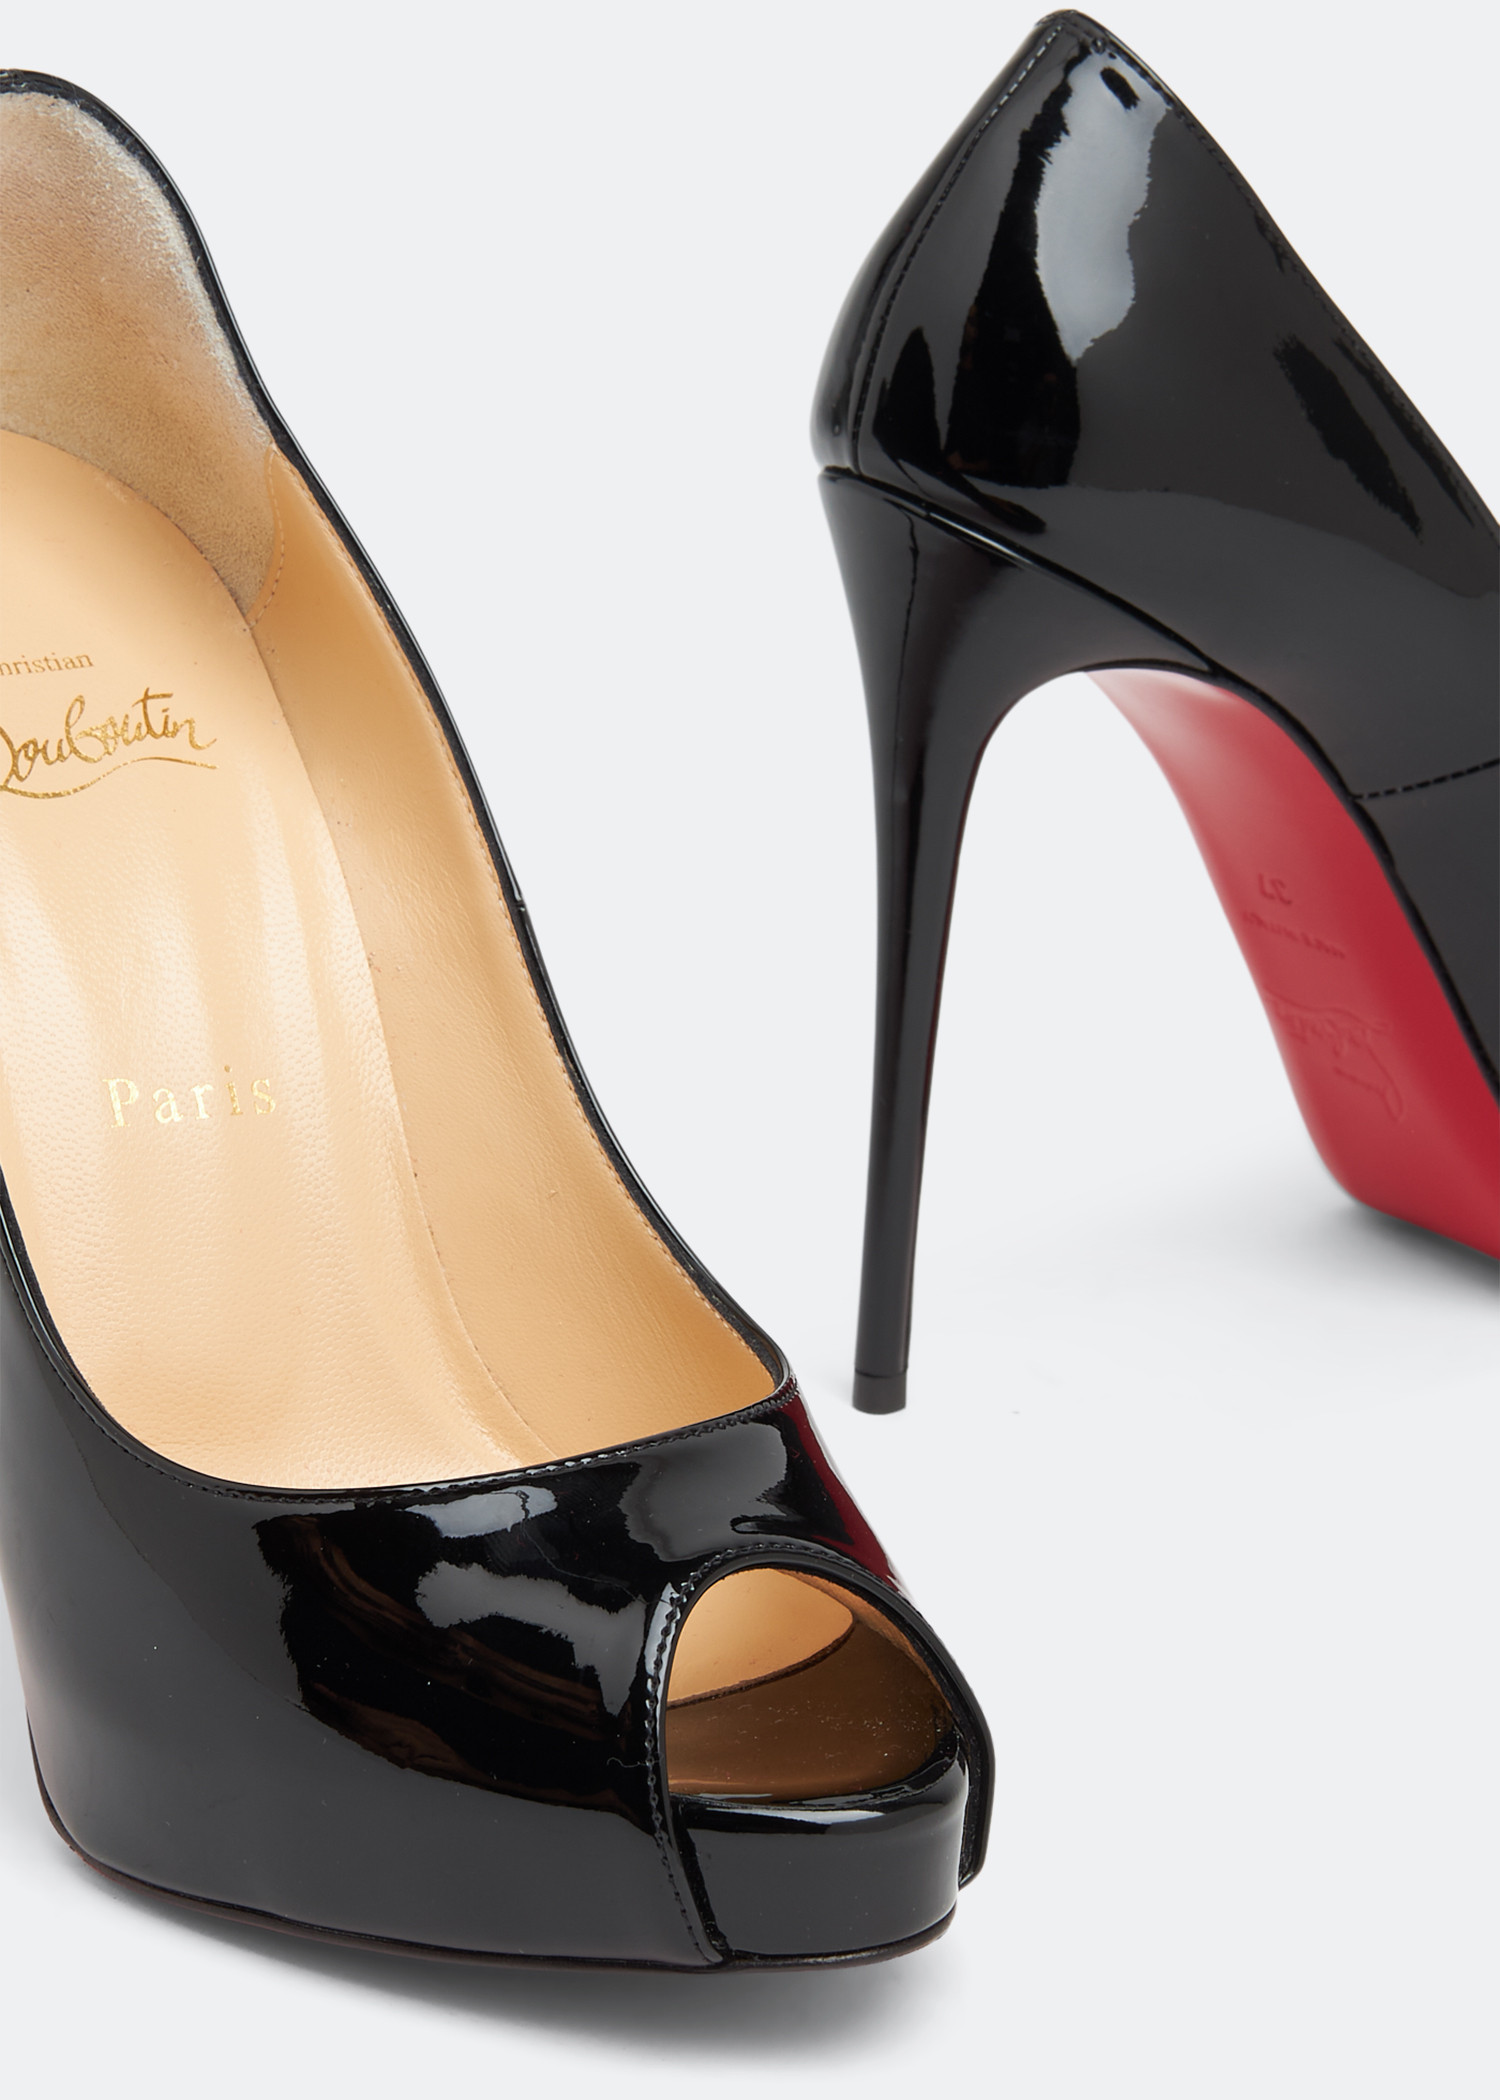 Christian Louboutin Pre-Loved New Very Privé 120 pumps for Women 